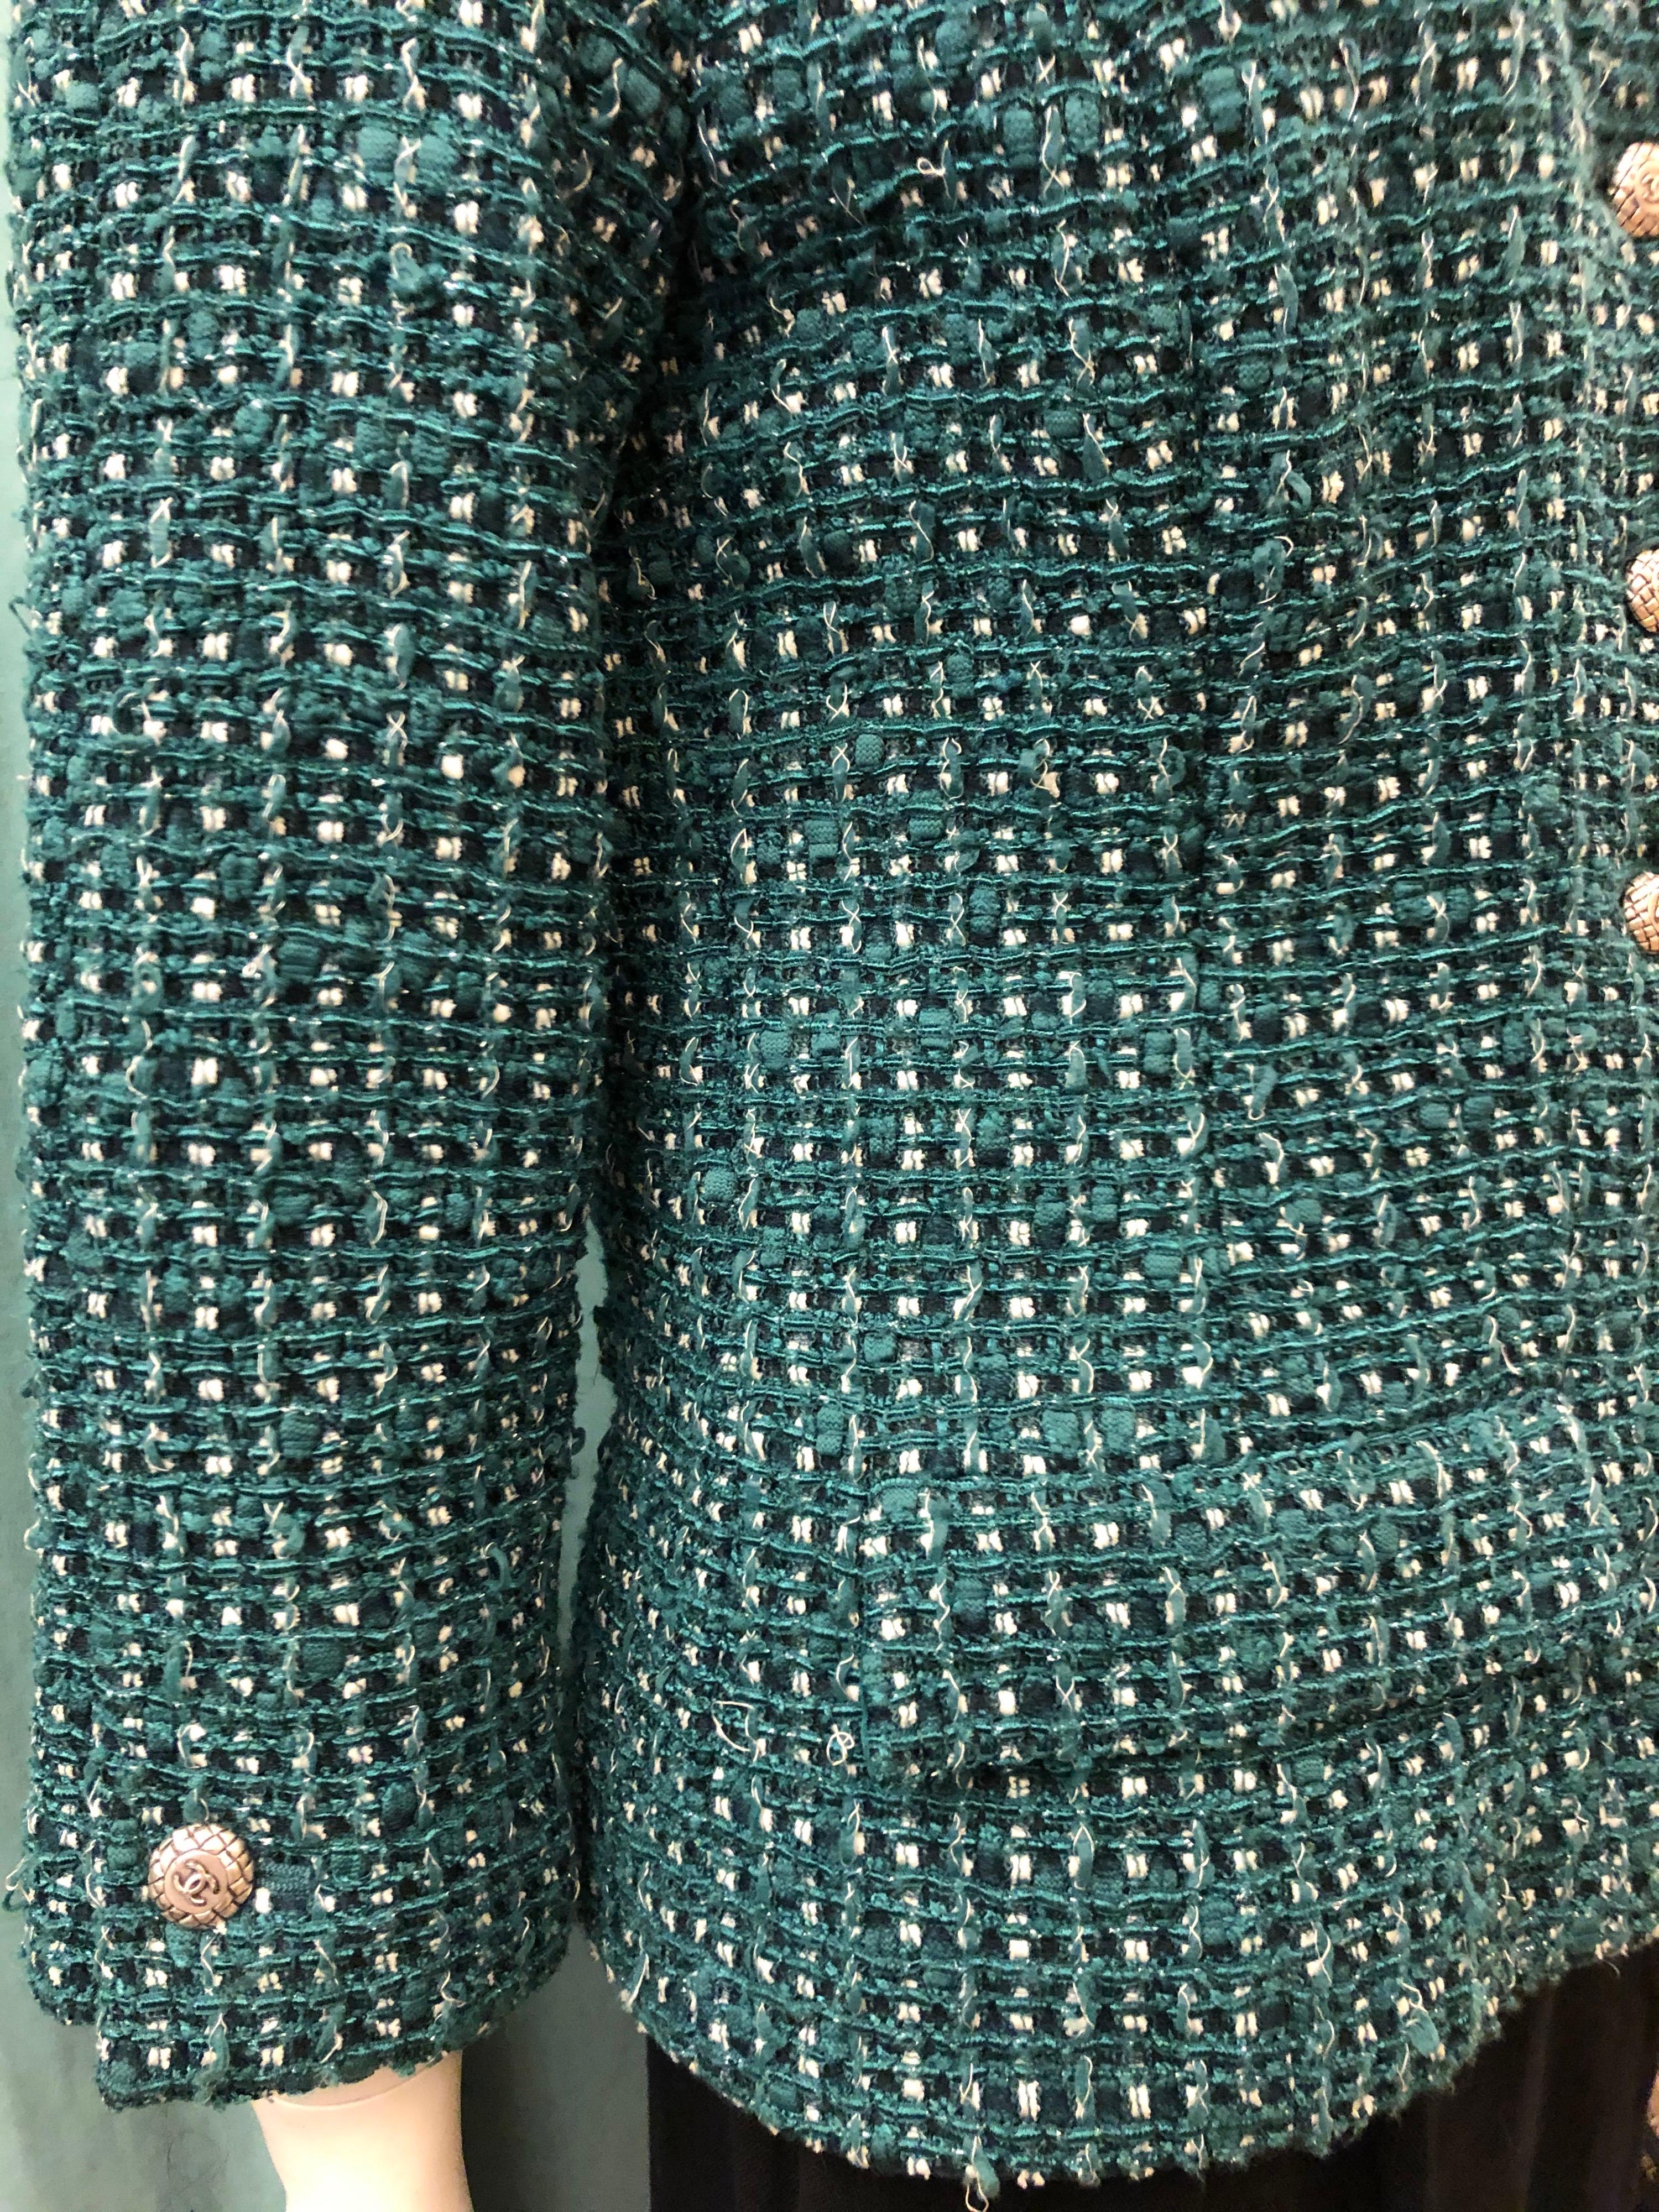 - Chanel green, white , black tweed jacket from 2006 cruise collection. 

- 3/4 length sleeves. 

- Silver buttons hardware closure. 

- Two front pockets. 

- Green silk 